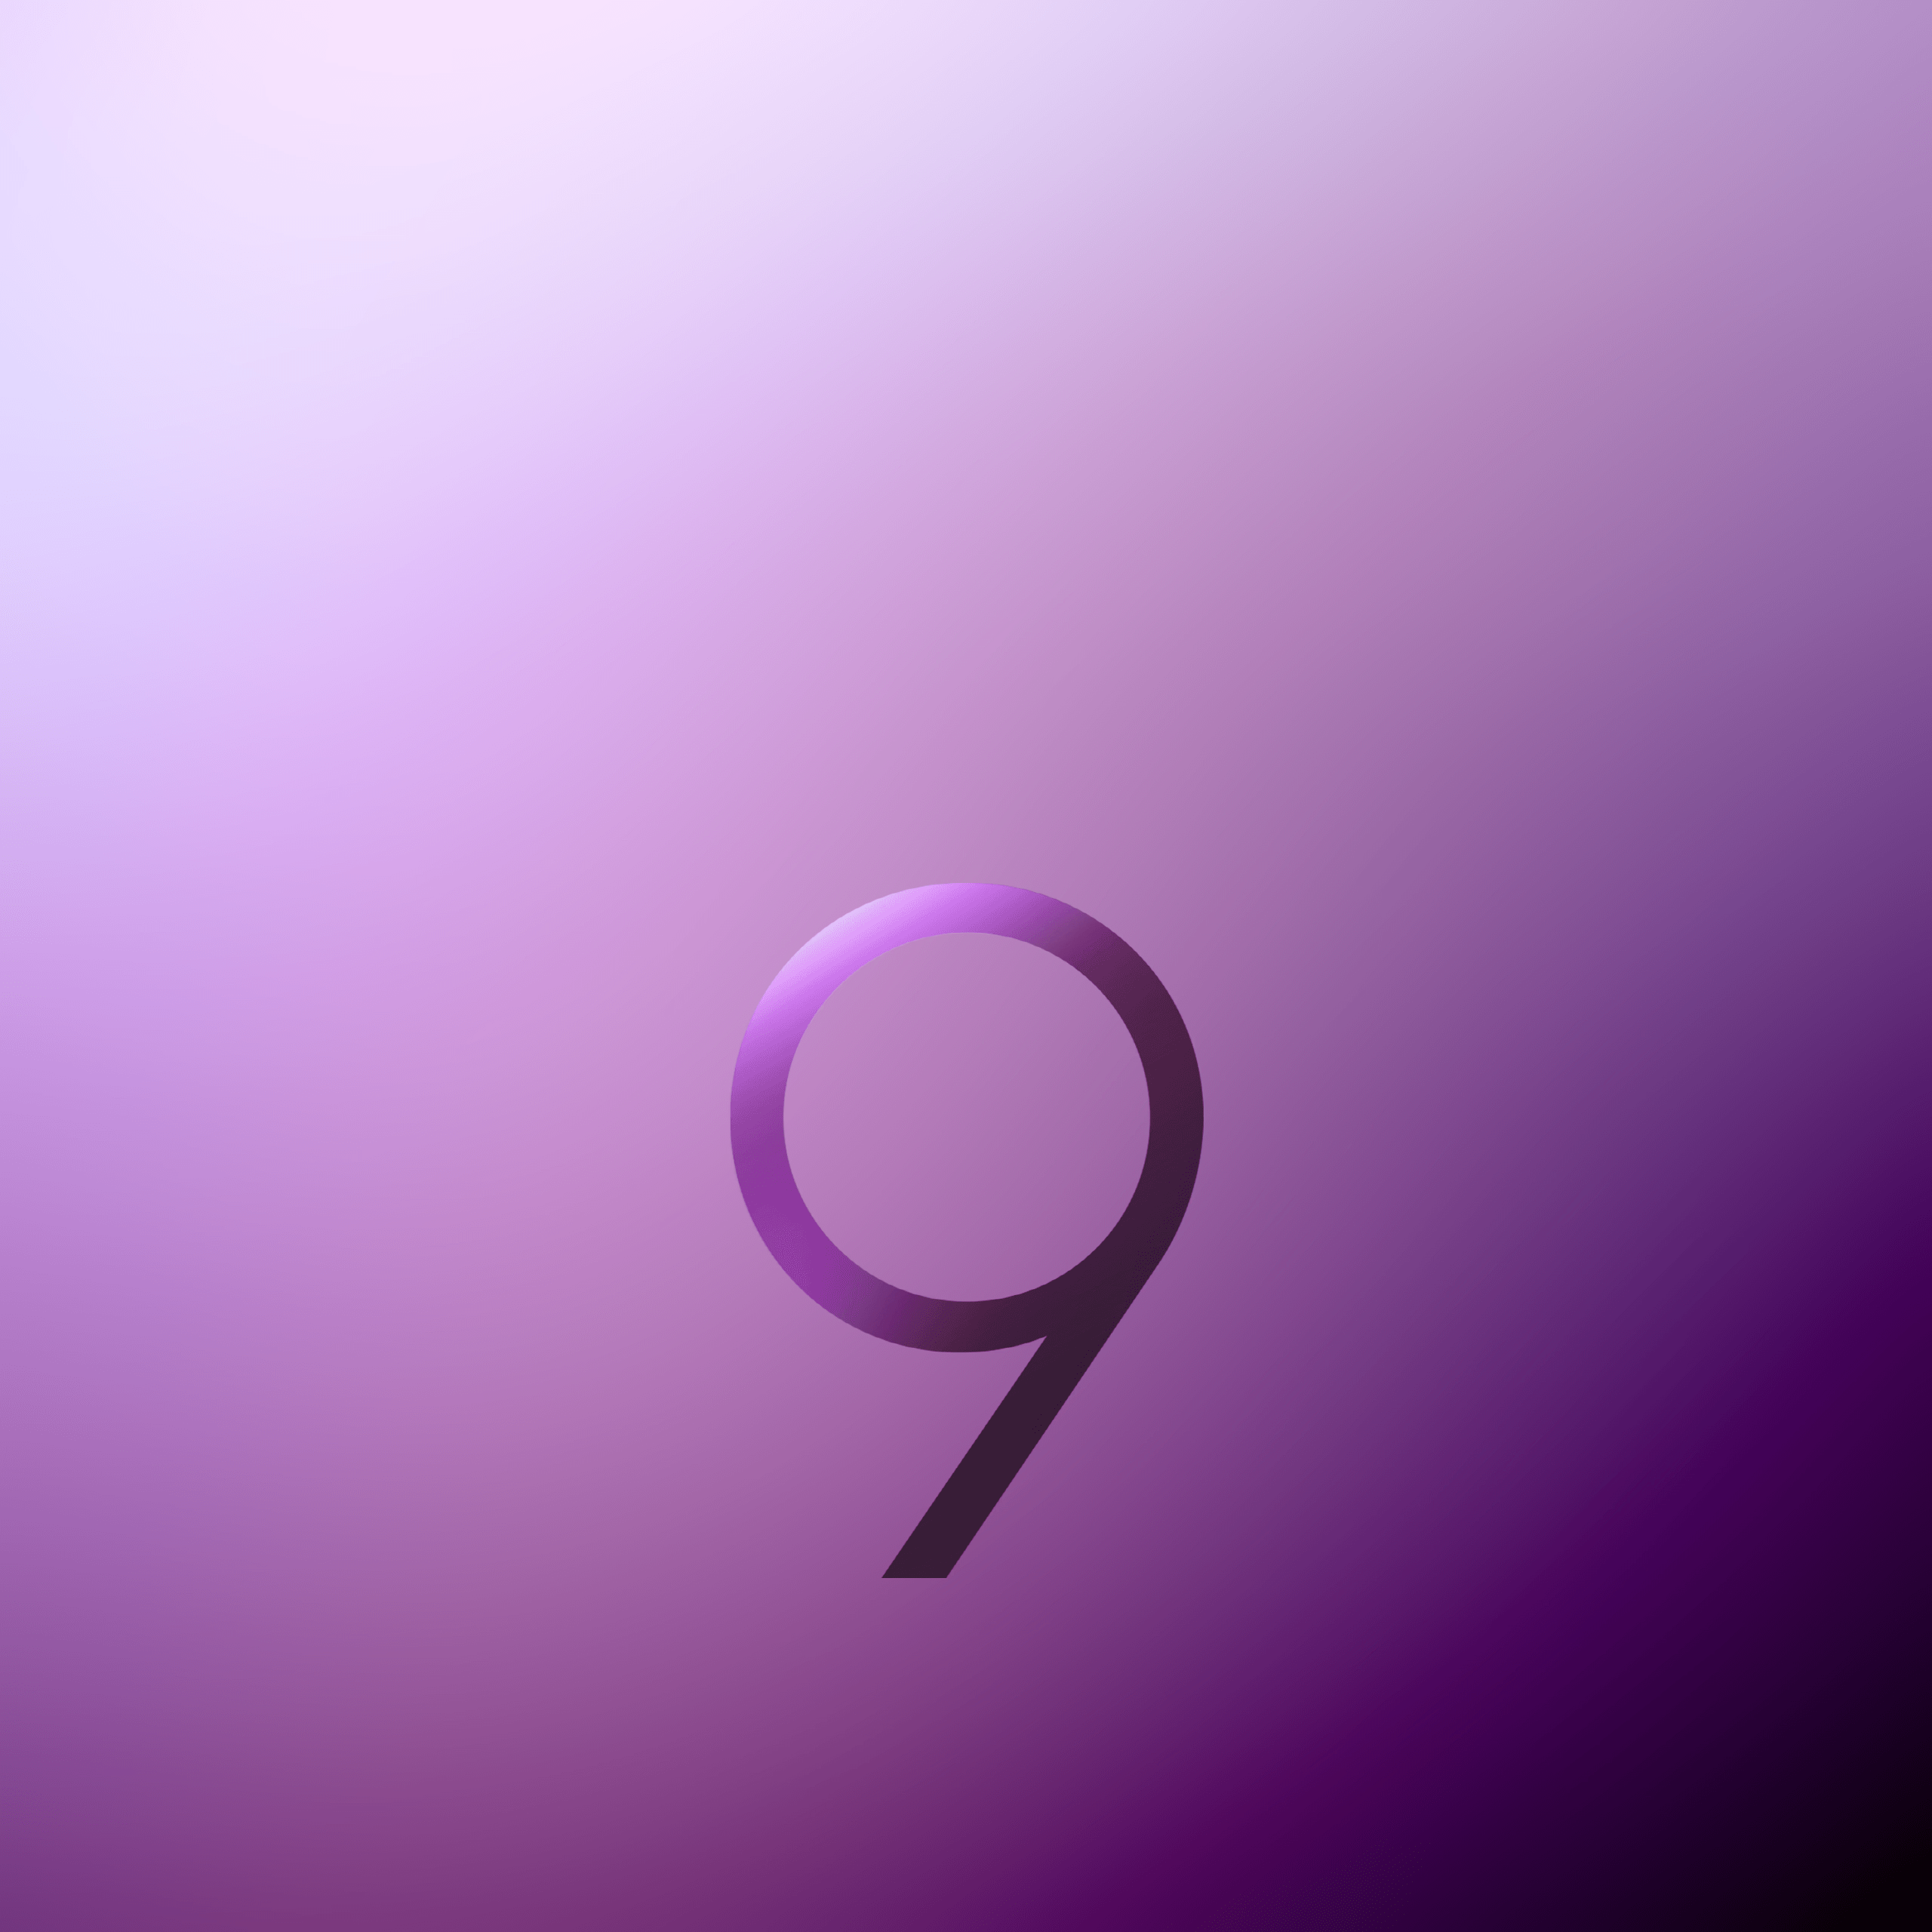 Official Gallery! Download Galaxy S9 Wallpaper [Leaked]